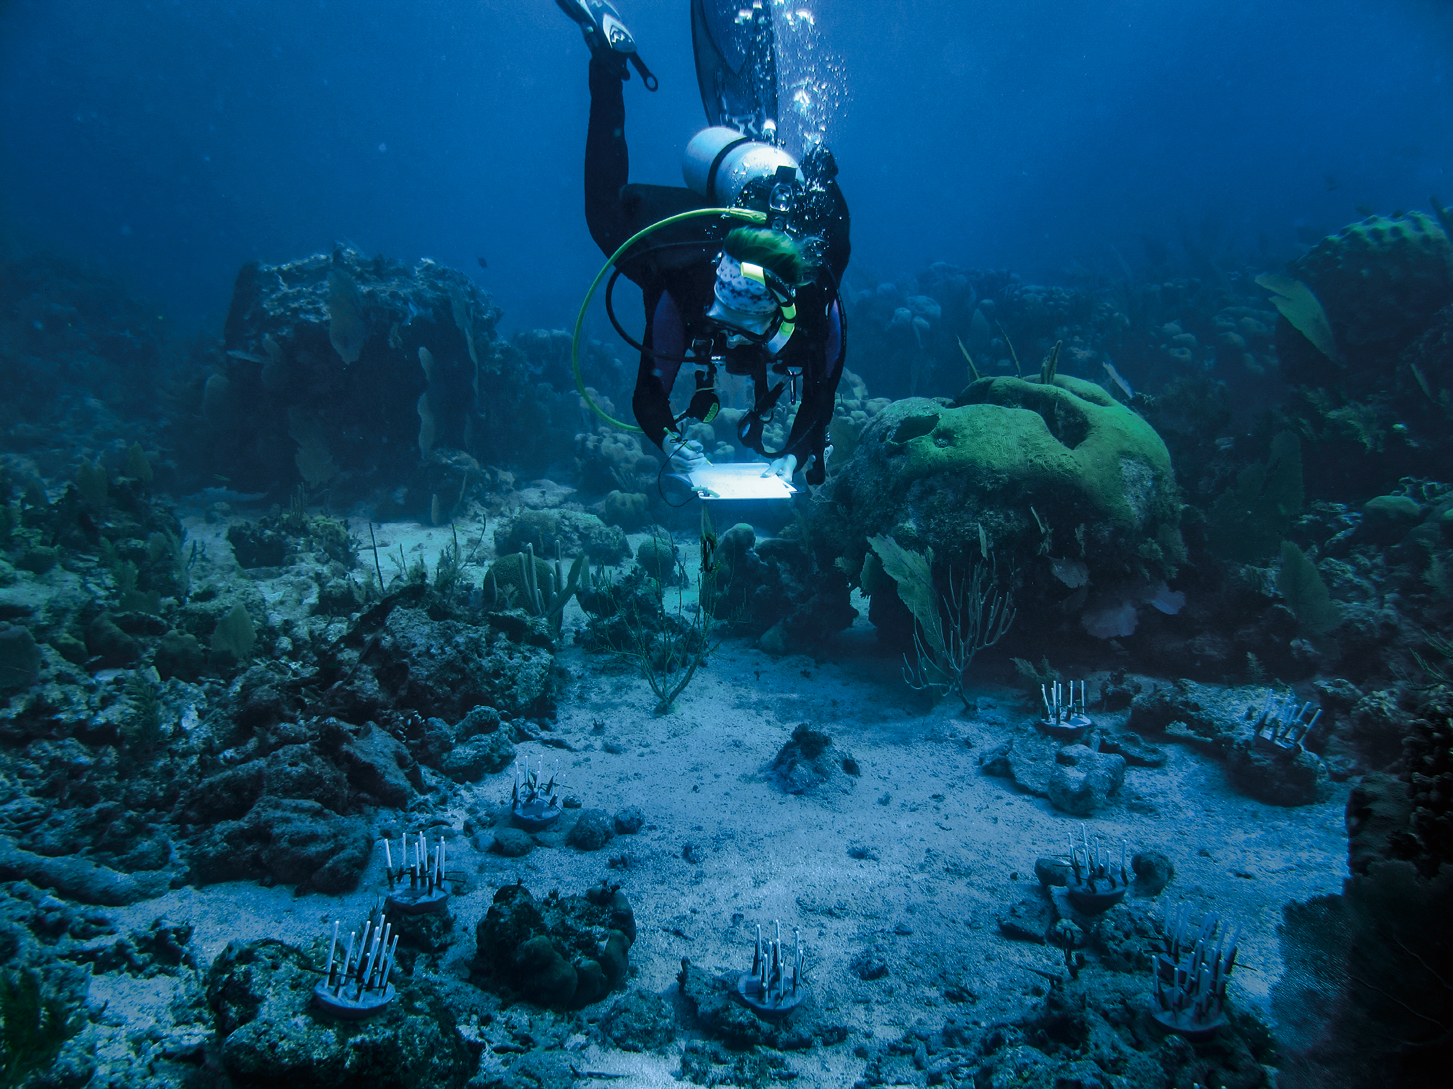 Scuba diver studying a reef